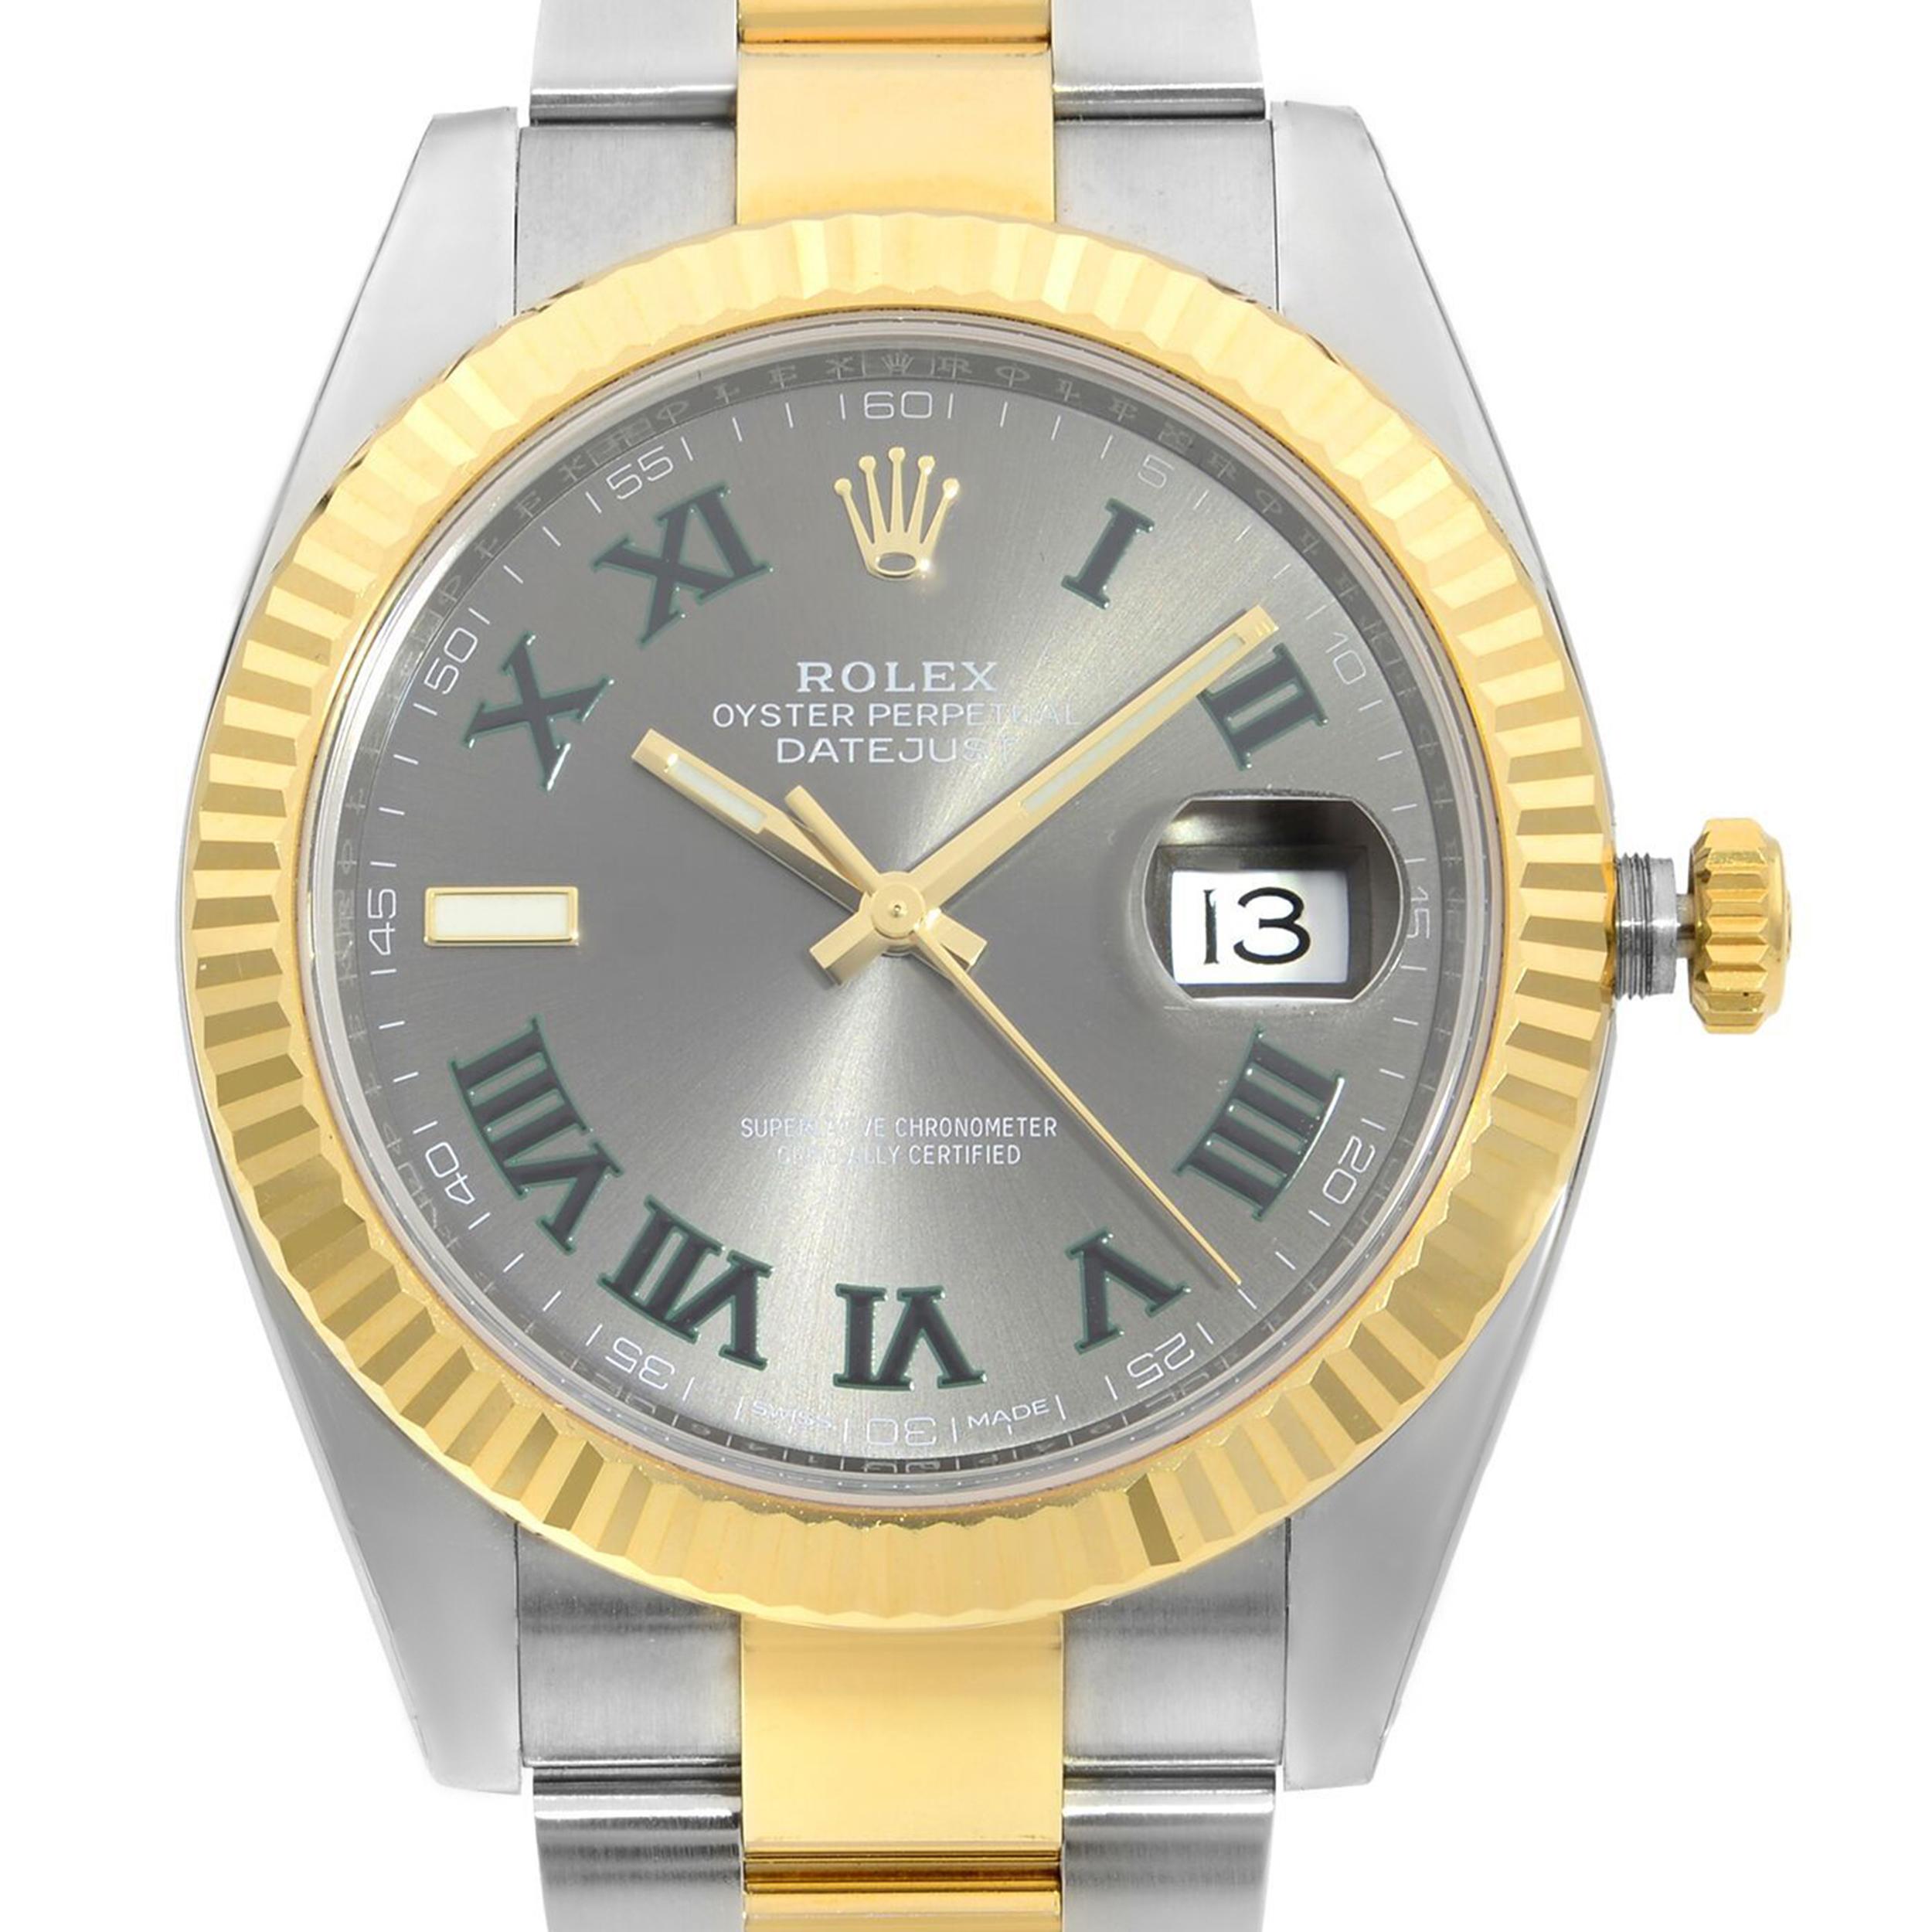 This pre-owned Rolex Datejust 41 126333 is a beautiful men's timepiece that is powered by mechanical (automatic) movement which is cased in a stainless steel case. It has a round shape face, date indicator dial and has hand roman numerals style